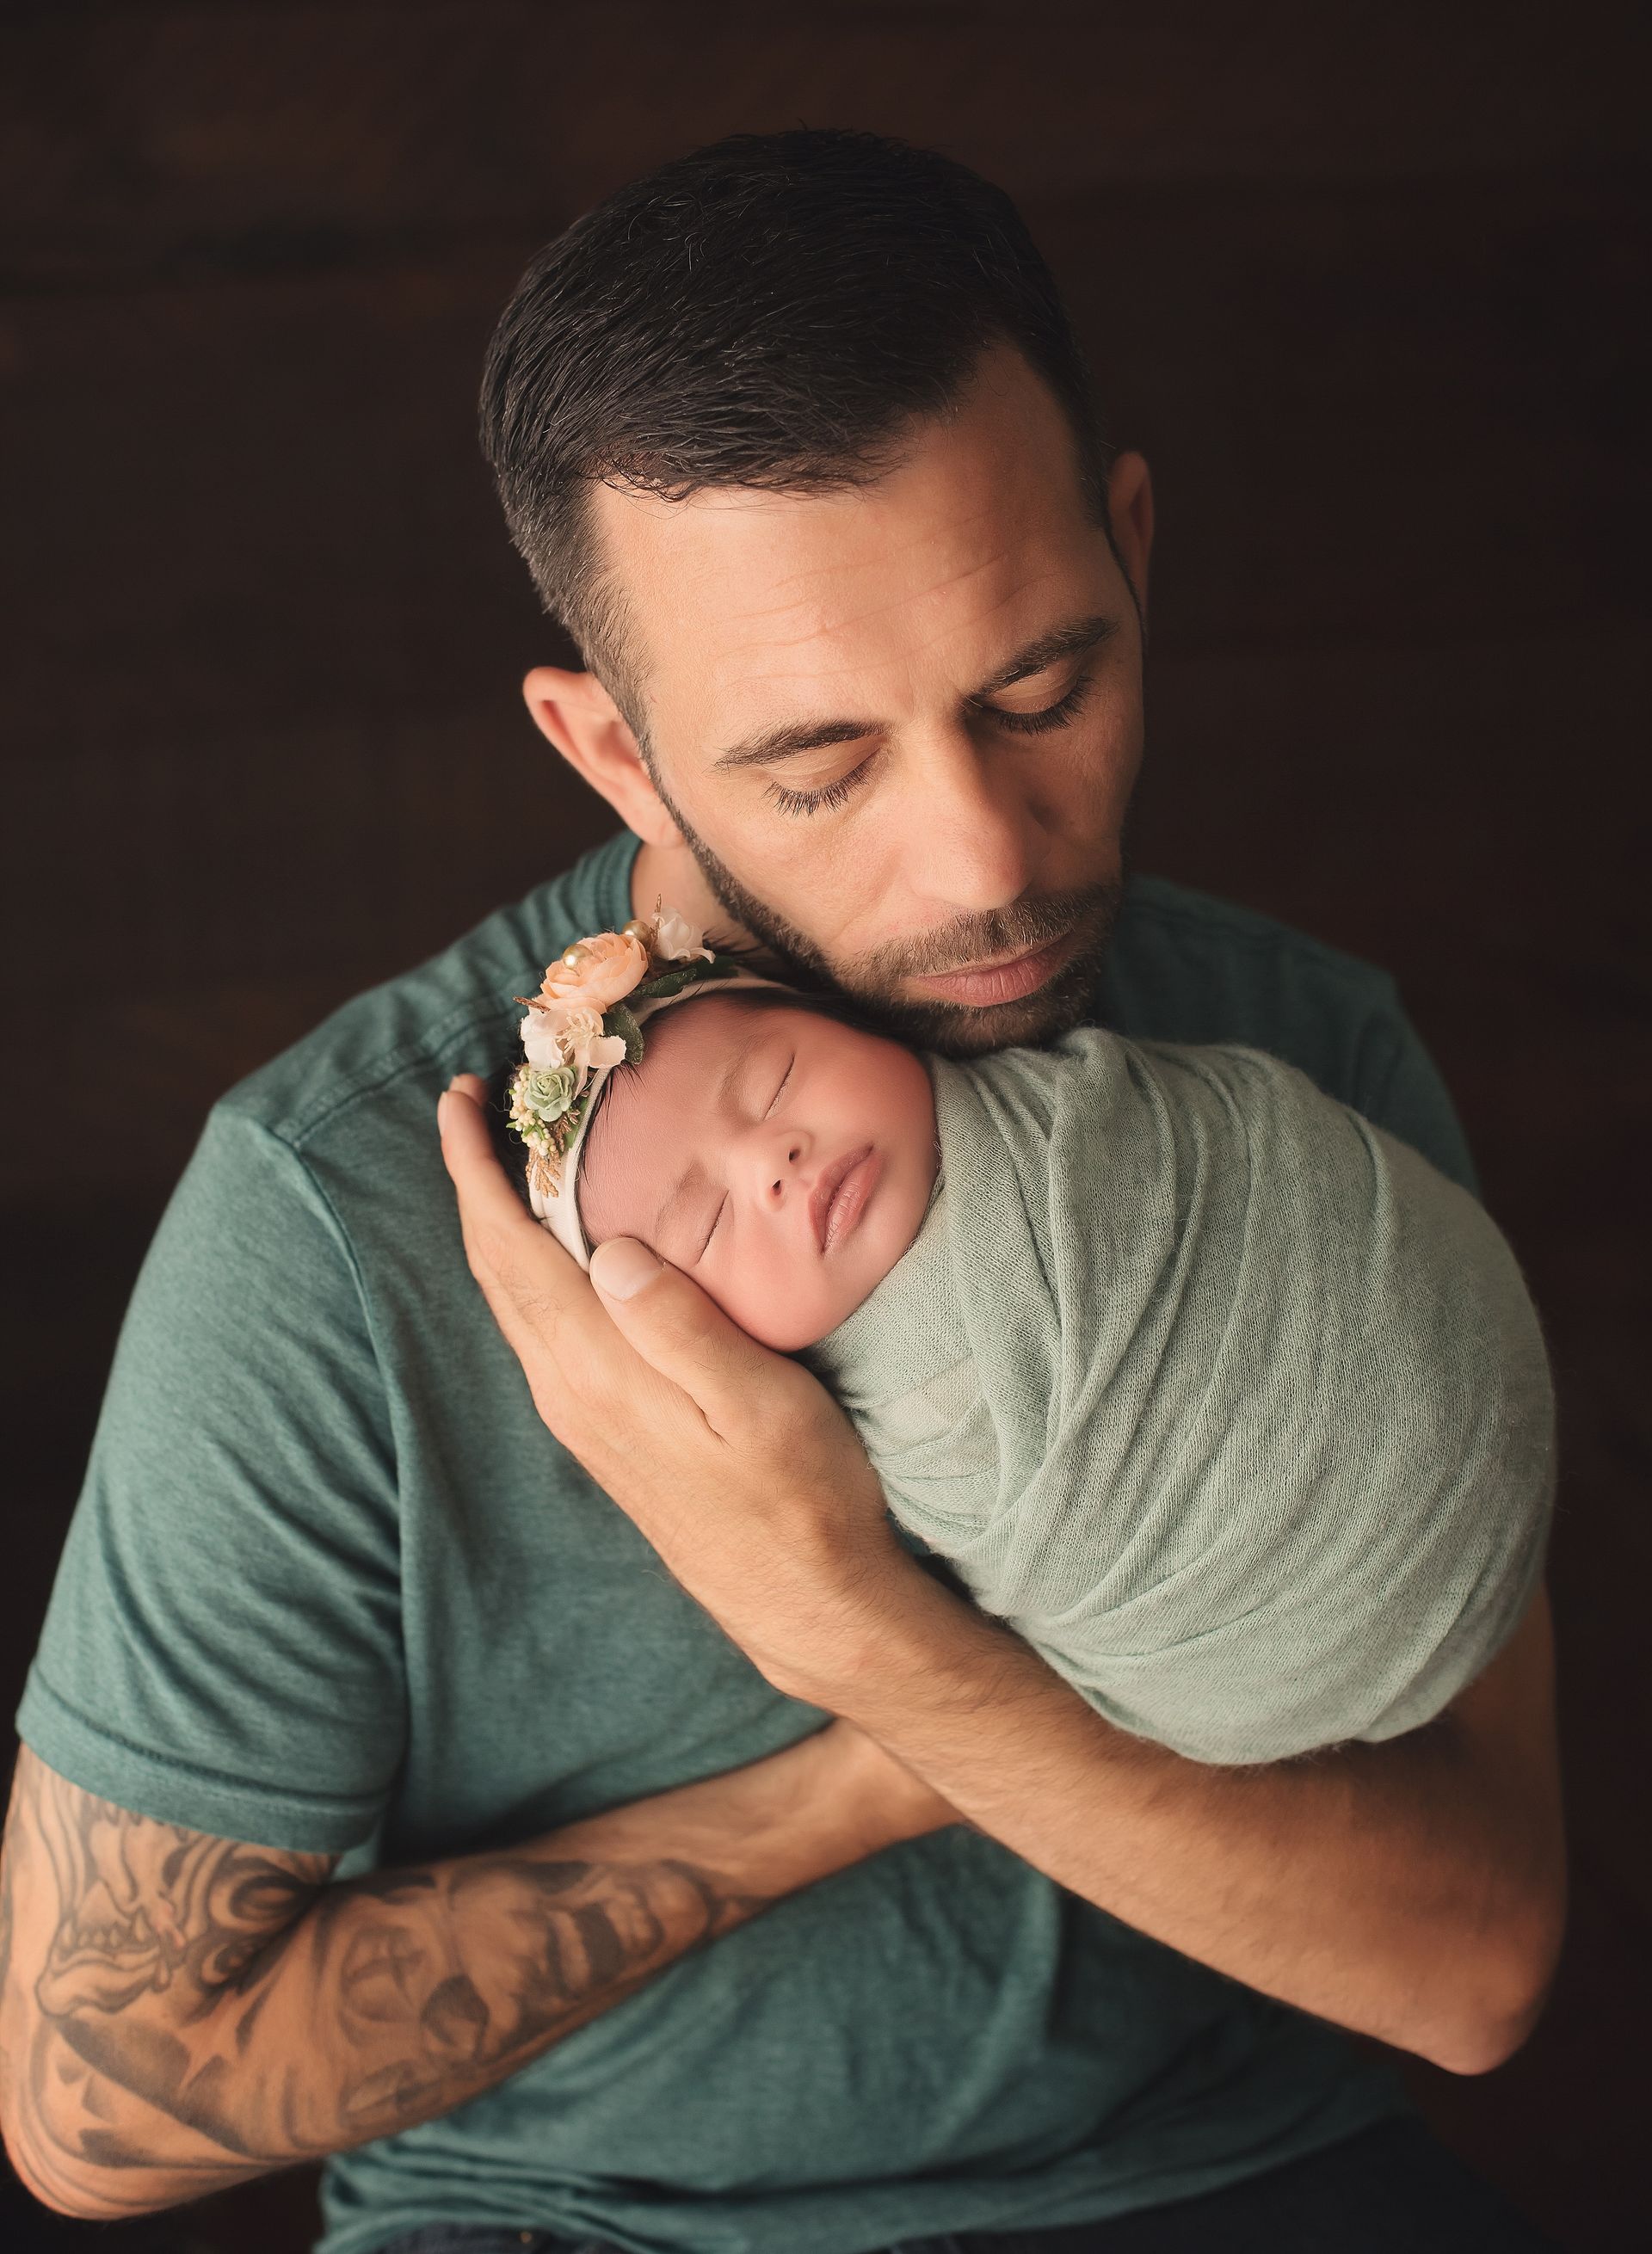 A man is holding a newborn baby wrapped in a blanket.